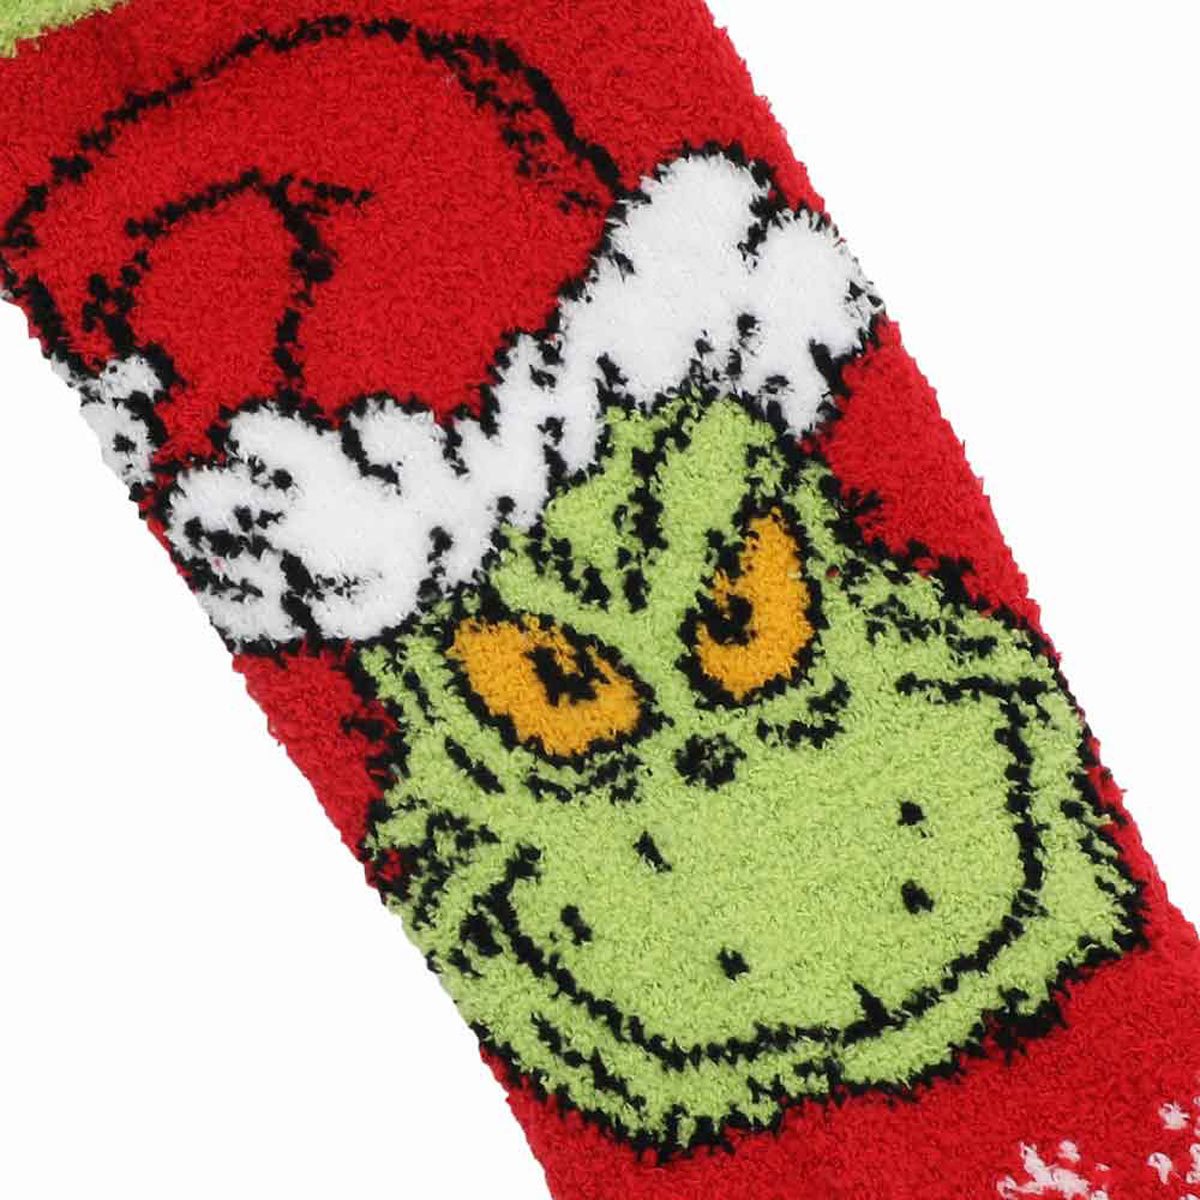 The Grinch – SimplyBellabyAnnette